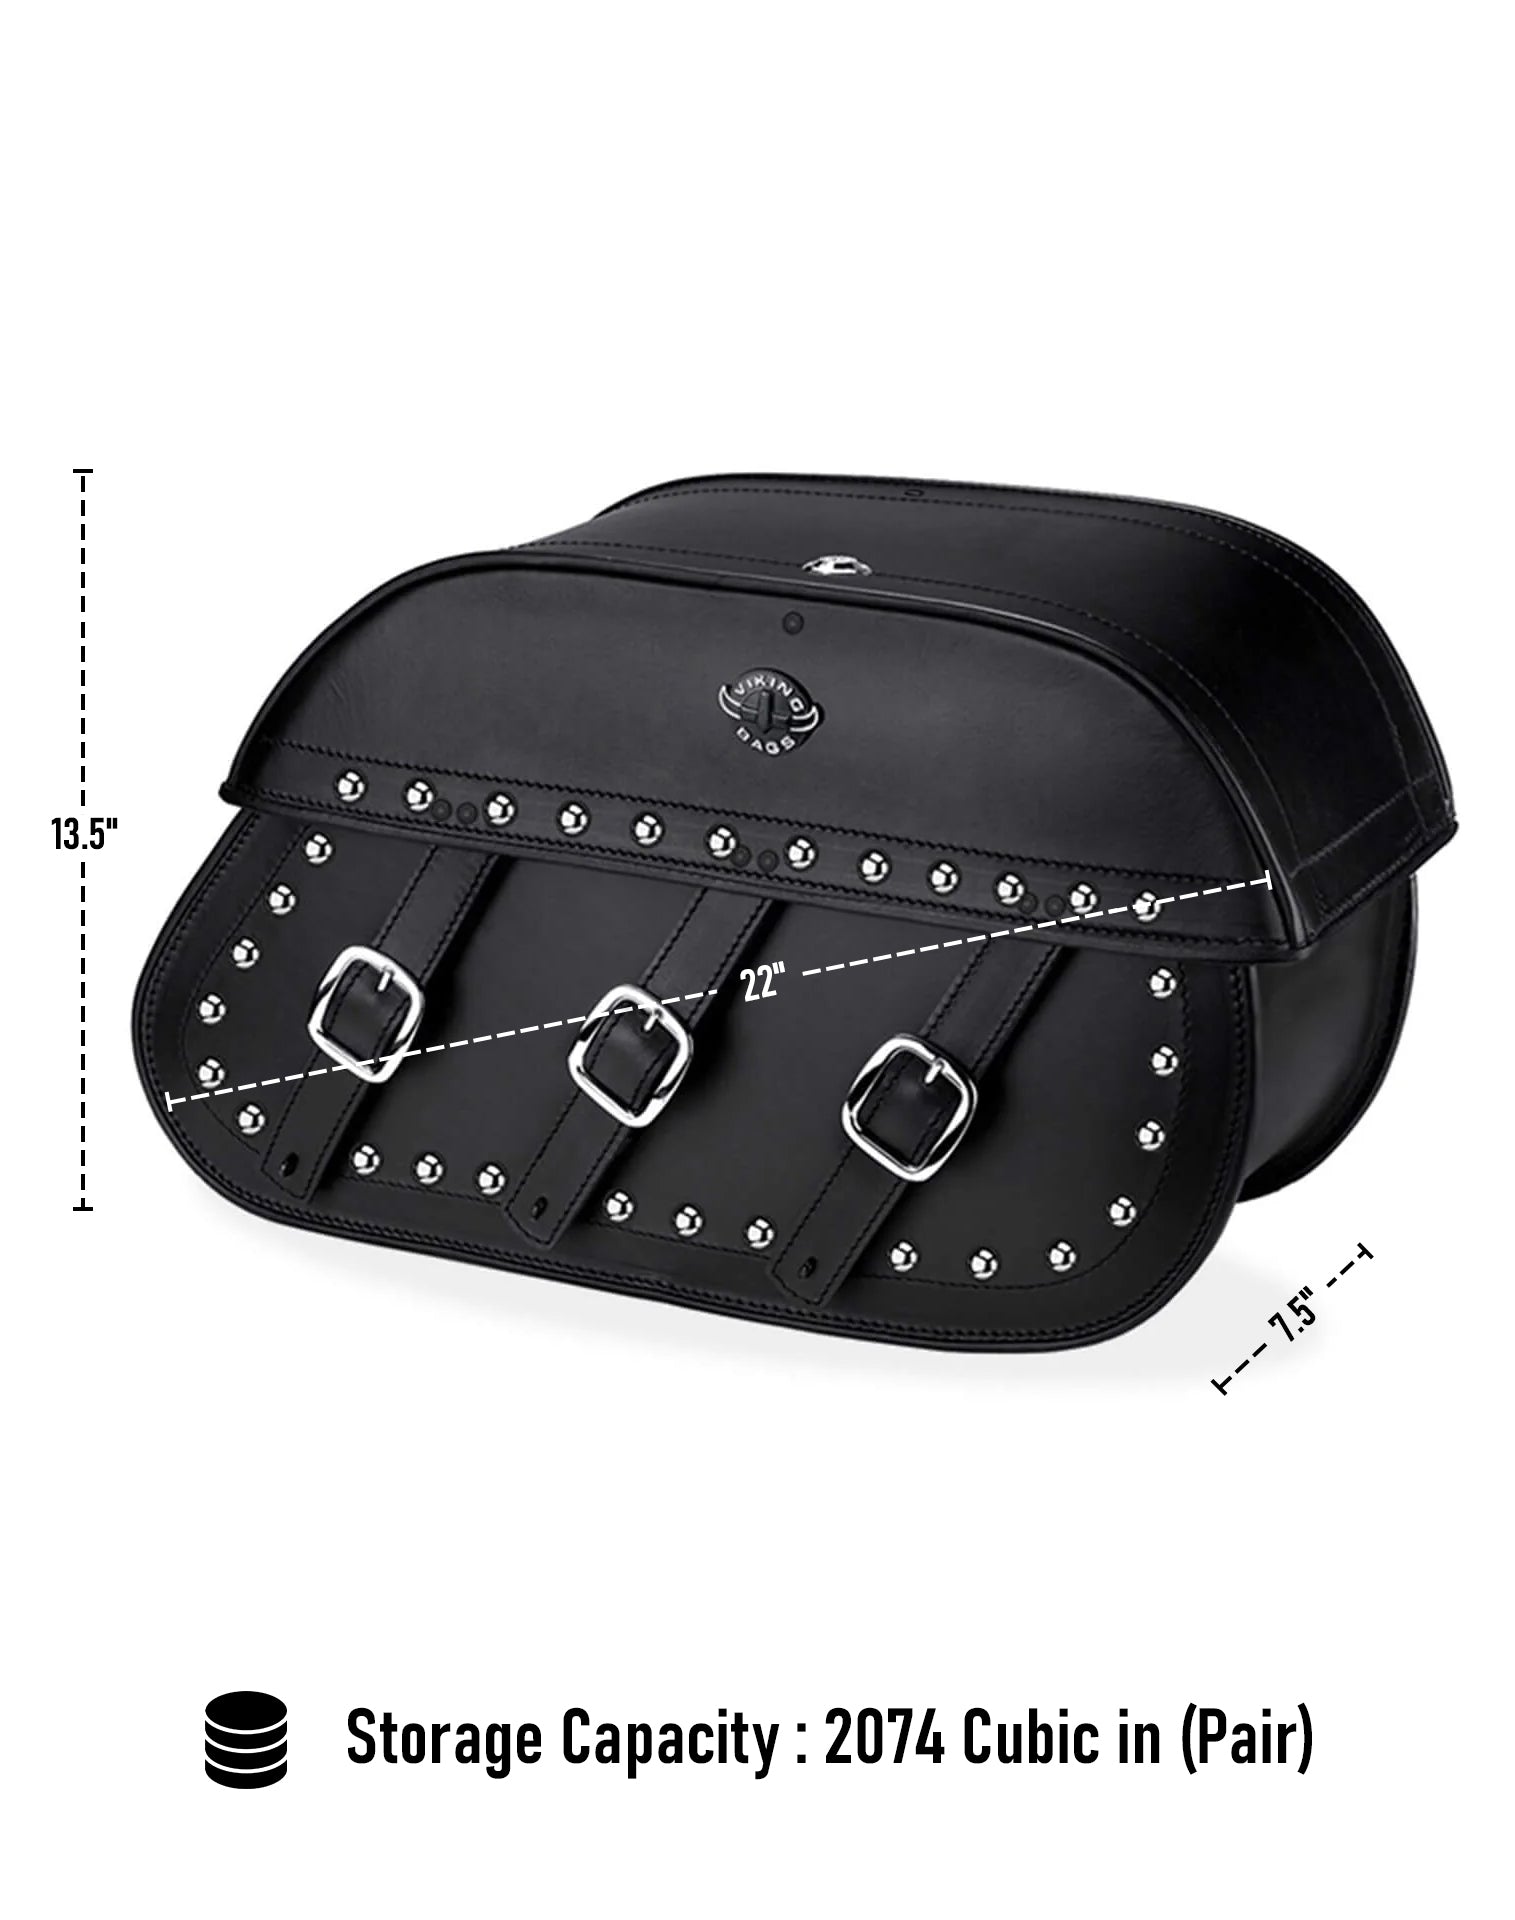 Viking Trianon Extra Large Kawasaki Vulcan 2000 Vn2000 Studded Leather Motorcycle Saddlebags Can Store Your Ridings Gears